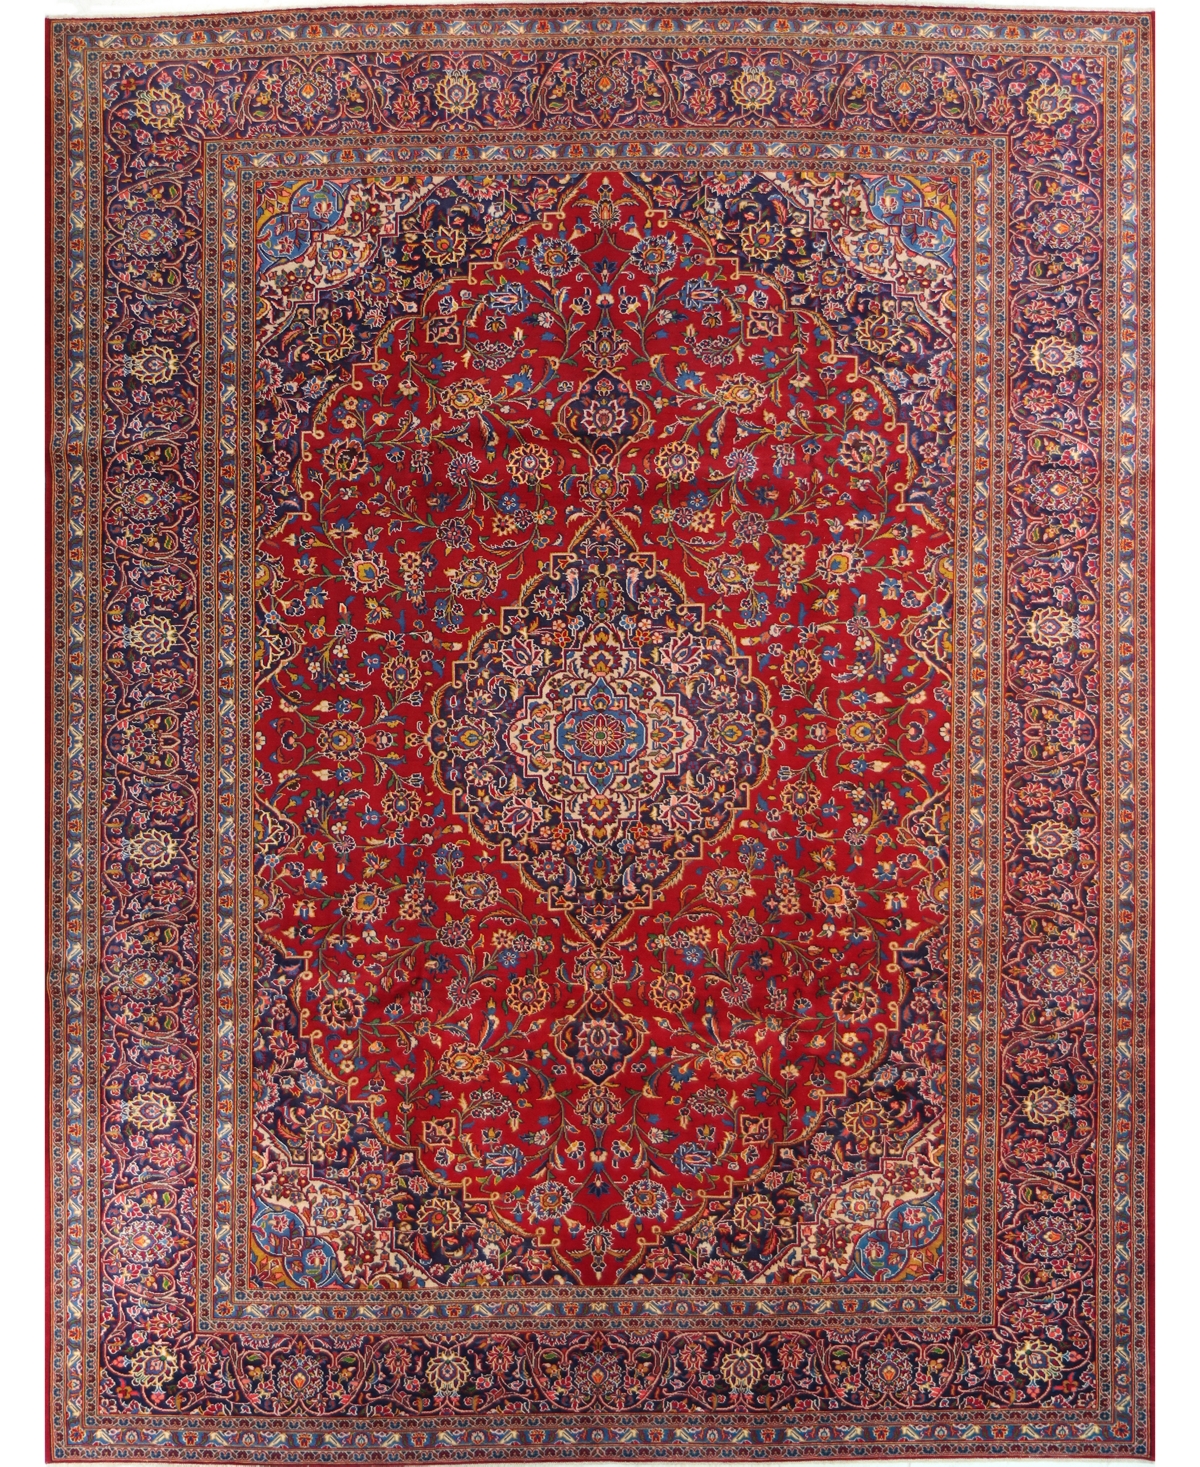 Bb Rugs One of a Kind Kashan 621211 9'7in x 12'7in Area Rug - Red